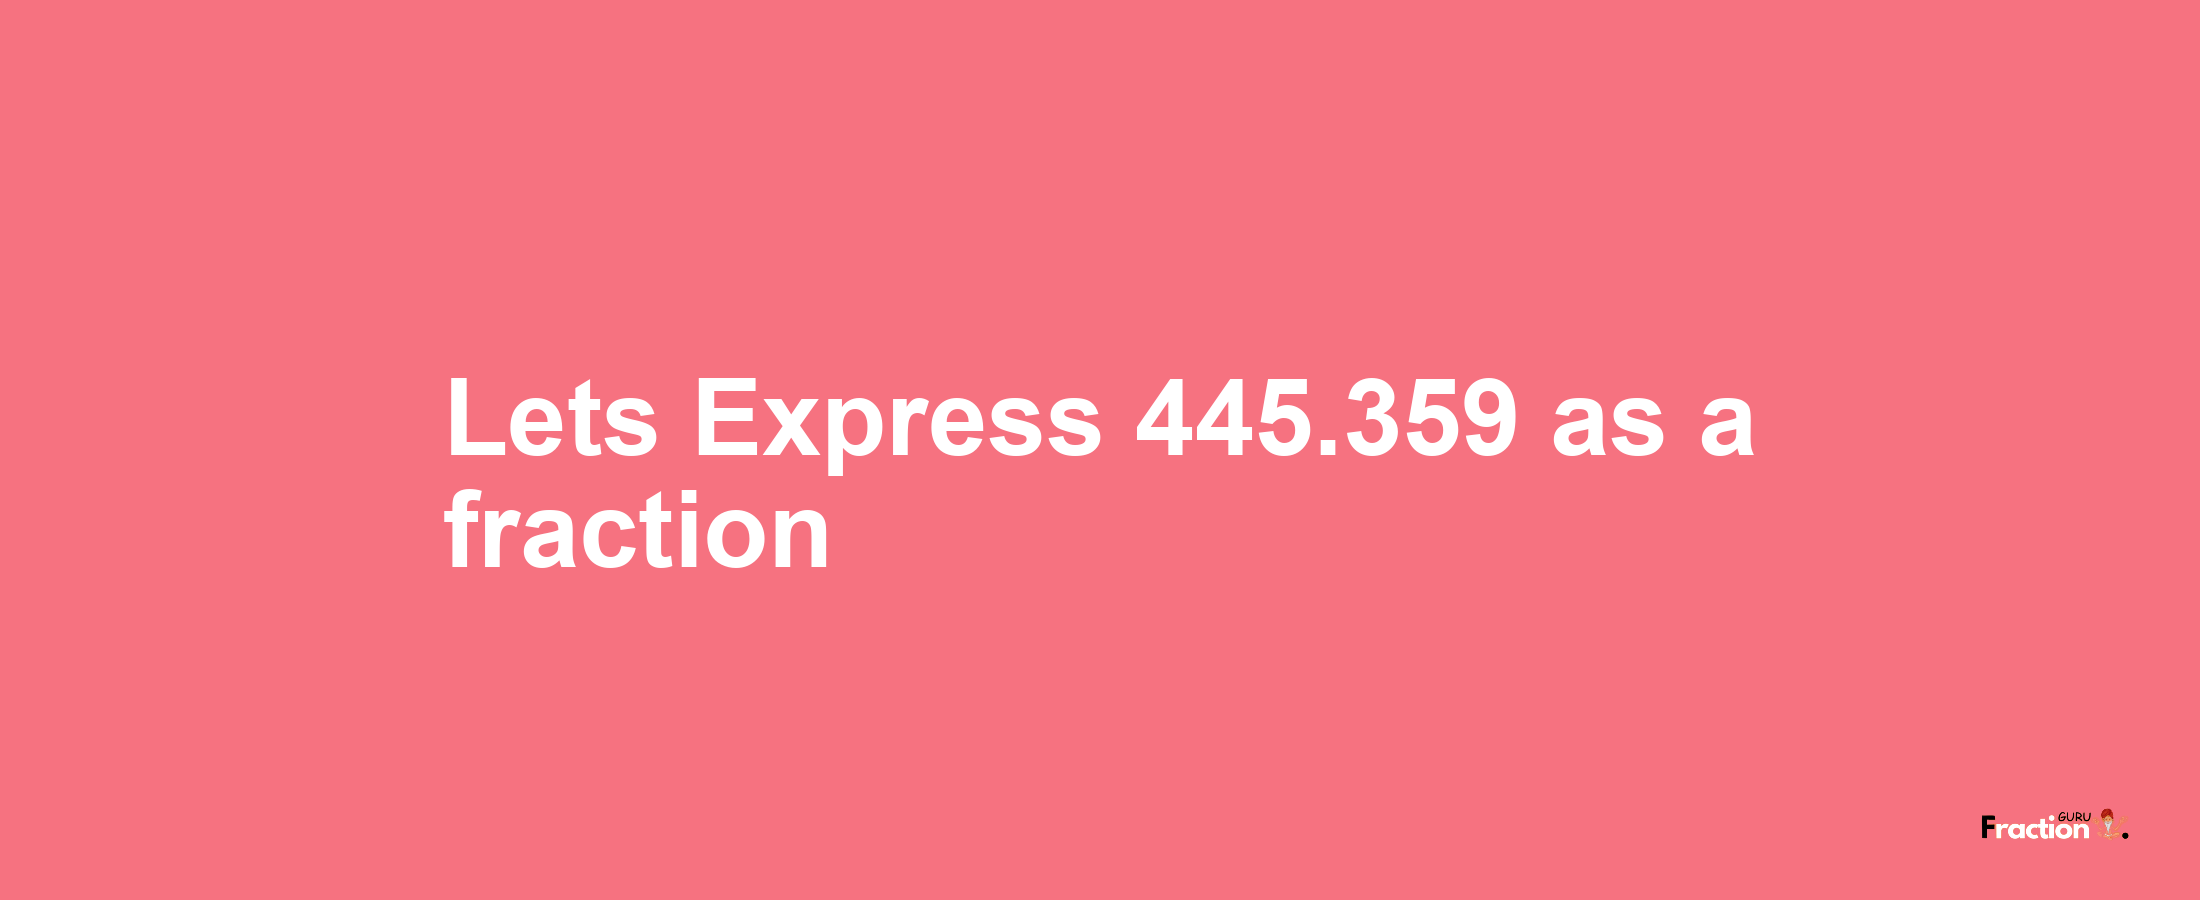 Lets Express 445.359 as afraction